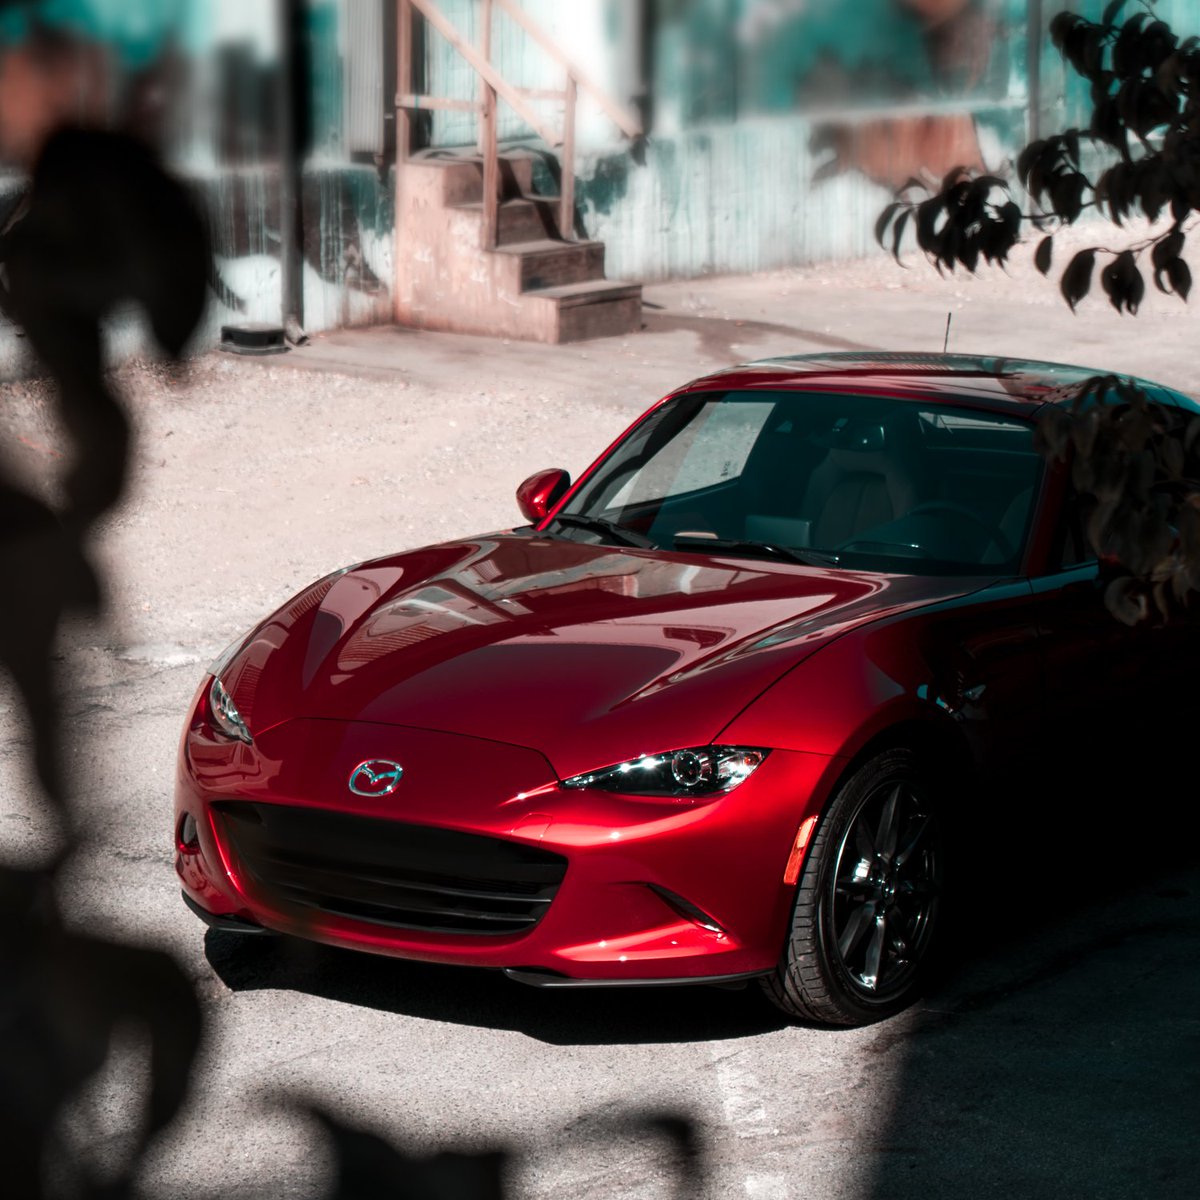 Mazda USA on Twitter: "What emoji best the in Soul Red Crystal Metallic? https://t.co/Q9wBpLHcE6" /